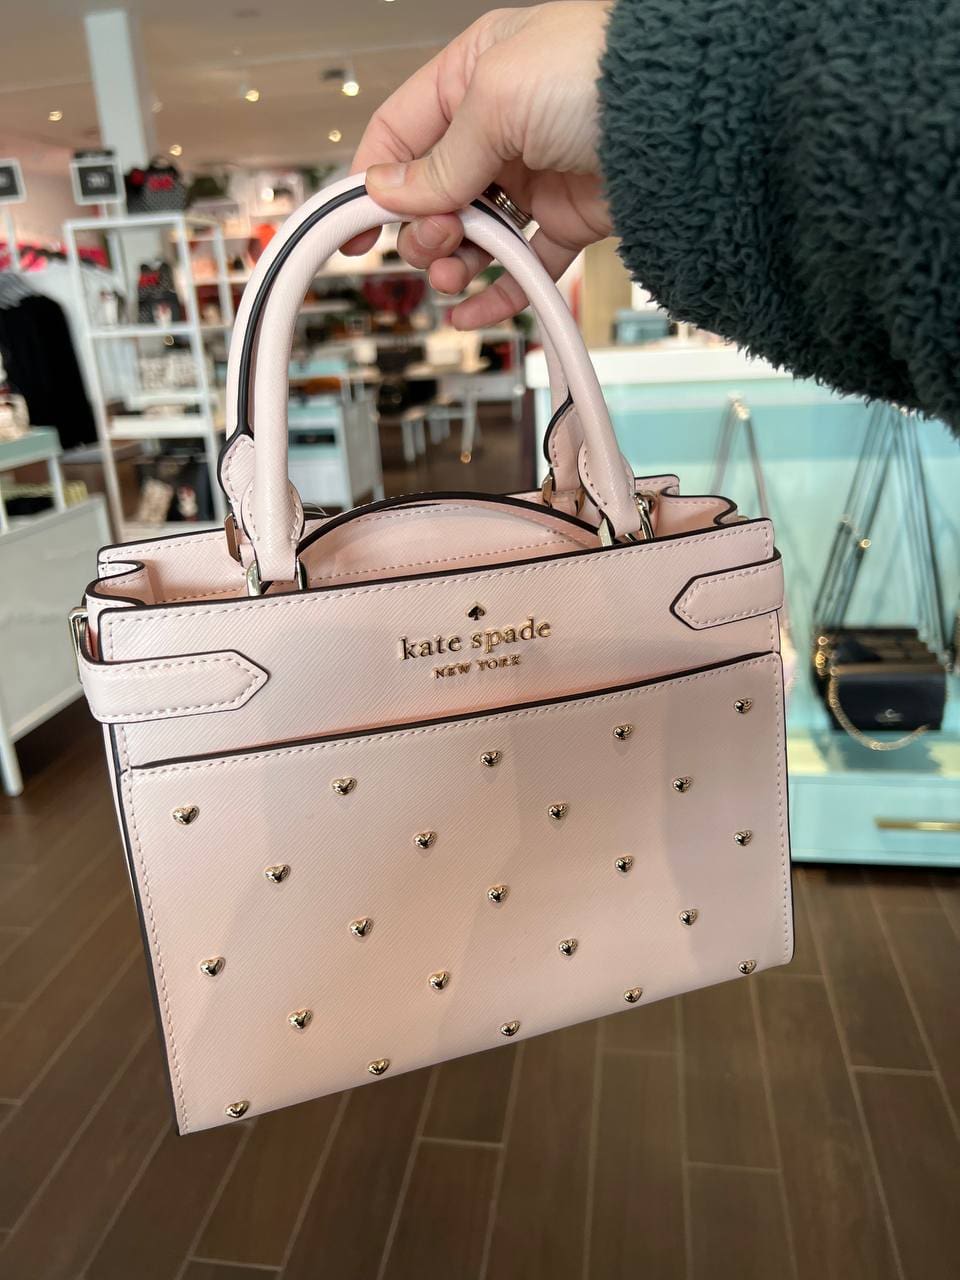 KATE SPADE NWT PINK BURGUNDY BOW CROSSBODY BAG | Black leather crossbody  bag, White crossbody bag, Blue leather wallet